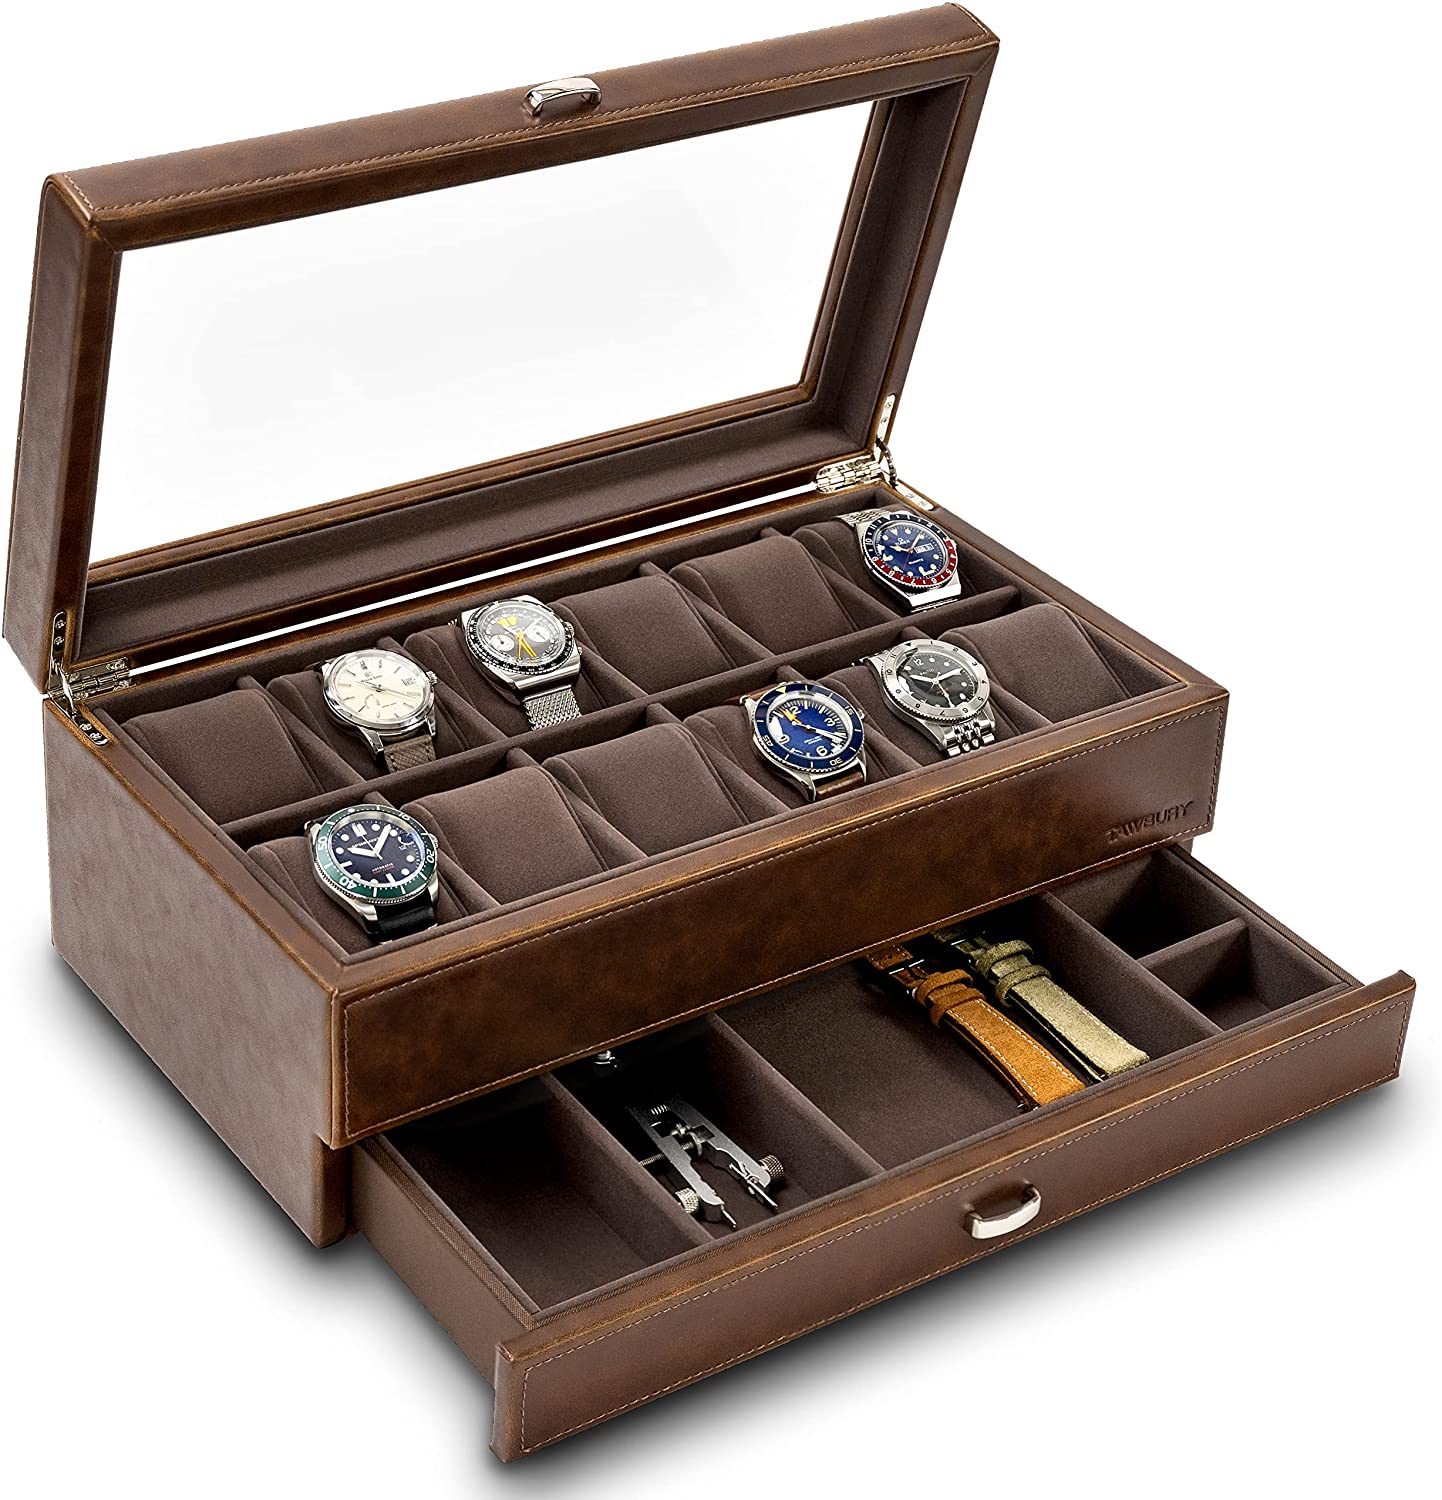 TAWBURY-Leather-Watch-Box Best 15 Valentine's Day Gift Ideas for Husband